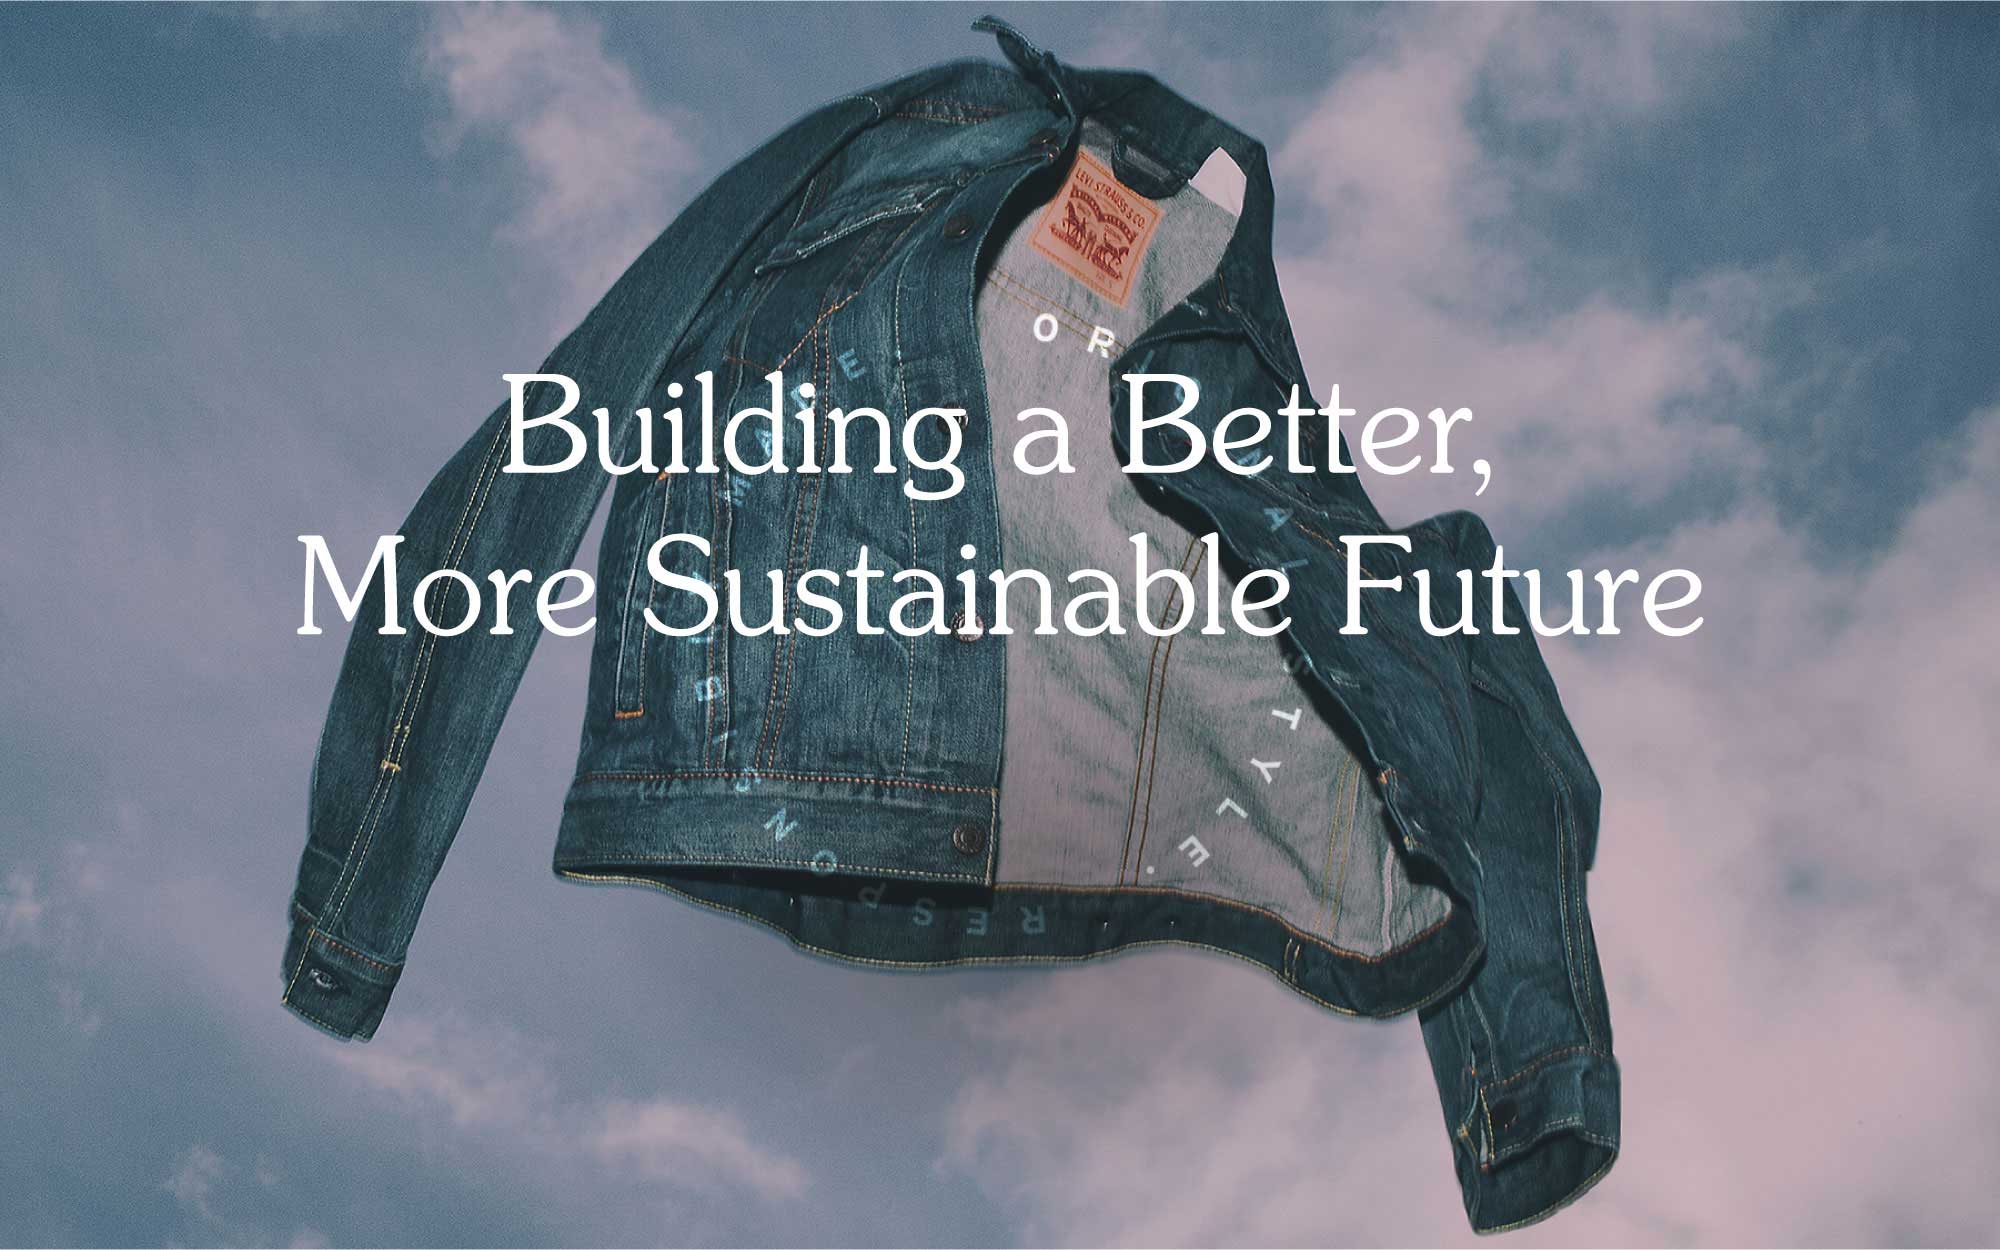 Levi's Sustainable Fashion : Building a Better, More Sustainable Future - Levi's Hong Kong